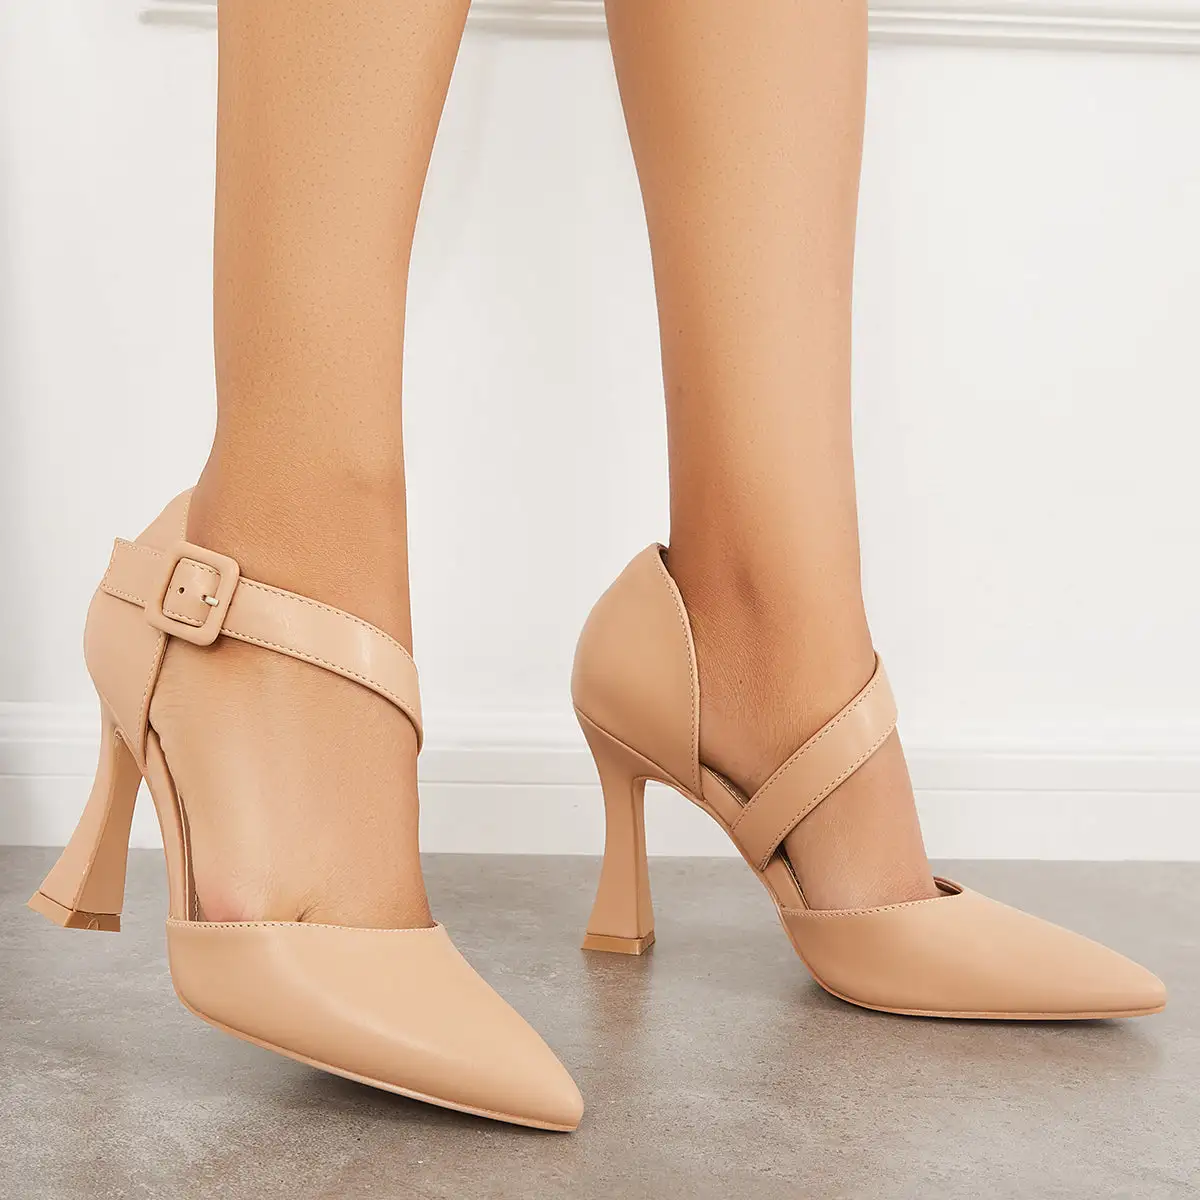 Classic Pointed Toe Pyramid Heels One Cross Strap Pumps